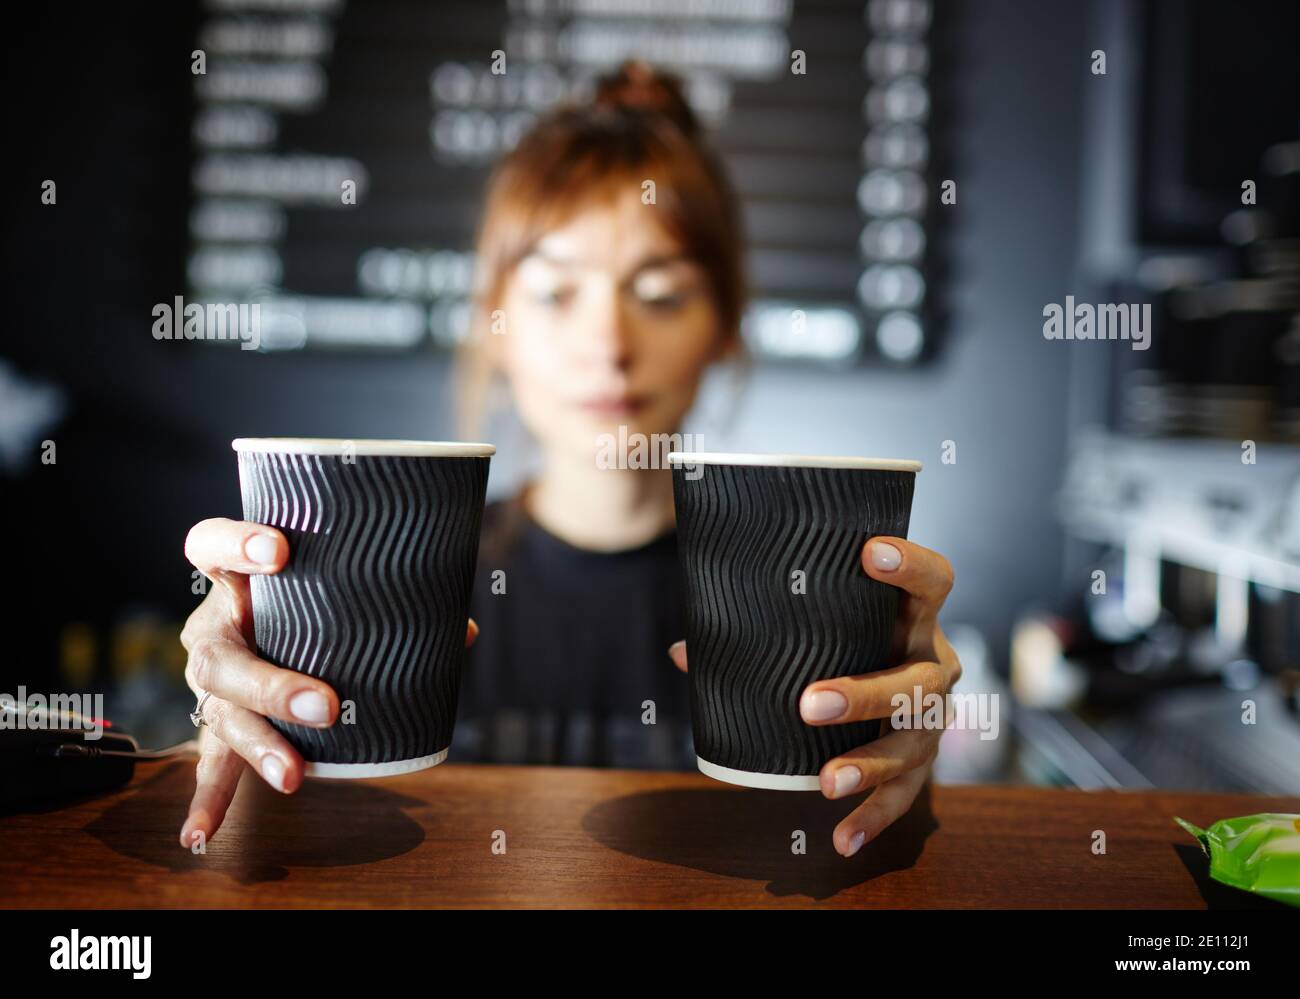 Barista holds two disposable paper cups of coffee in coffee shop. Blurred image, selective focus Stock Photo